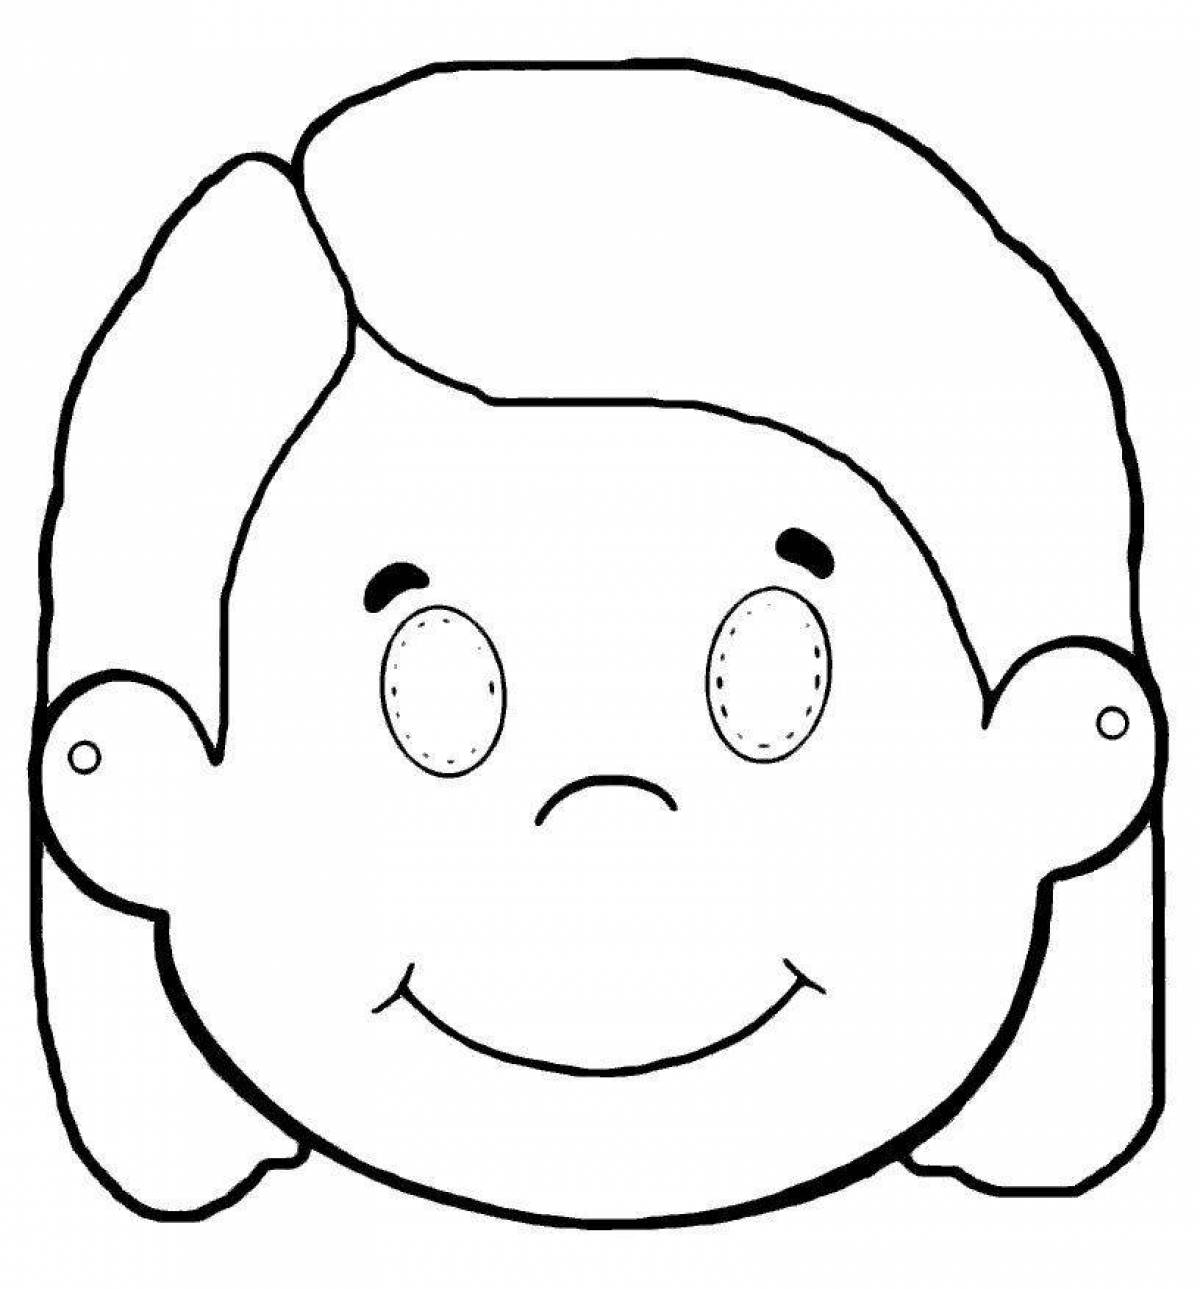 Shining head coloring page